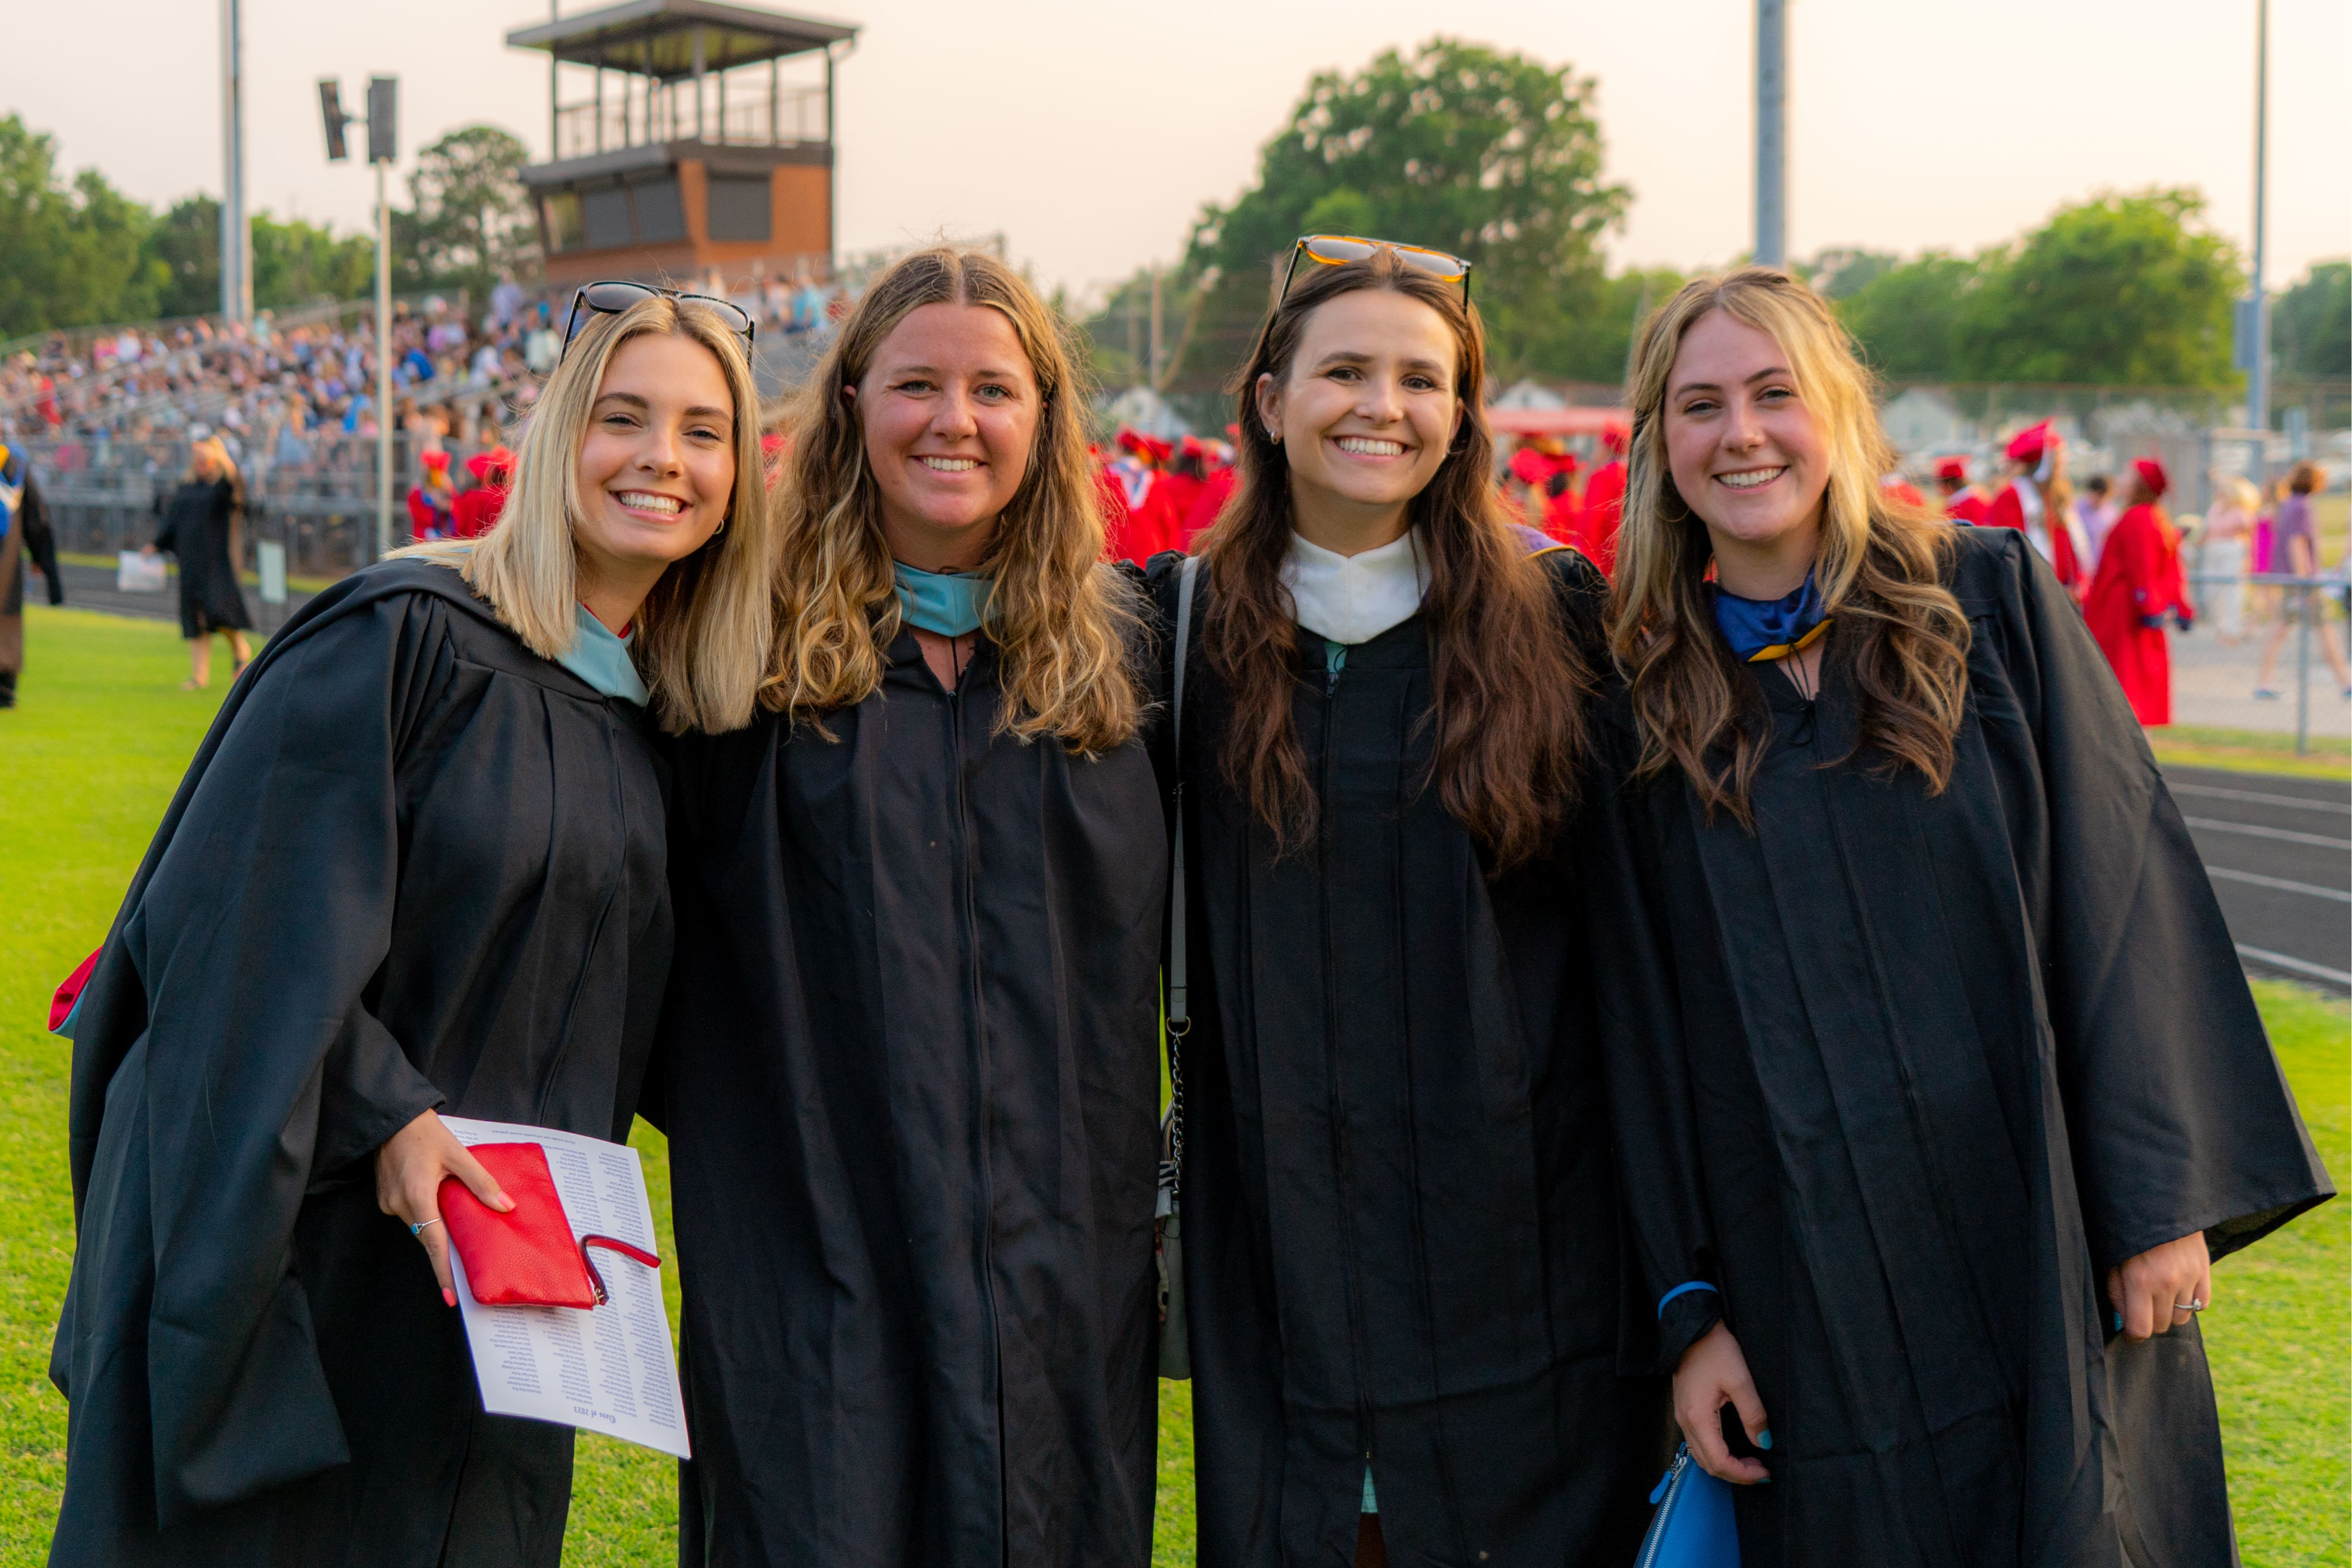 Four white female teachers in their 20s stand together smiling at graduation. They are wearing their black college graduation gowns.